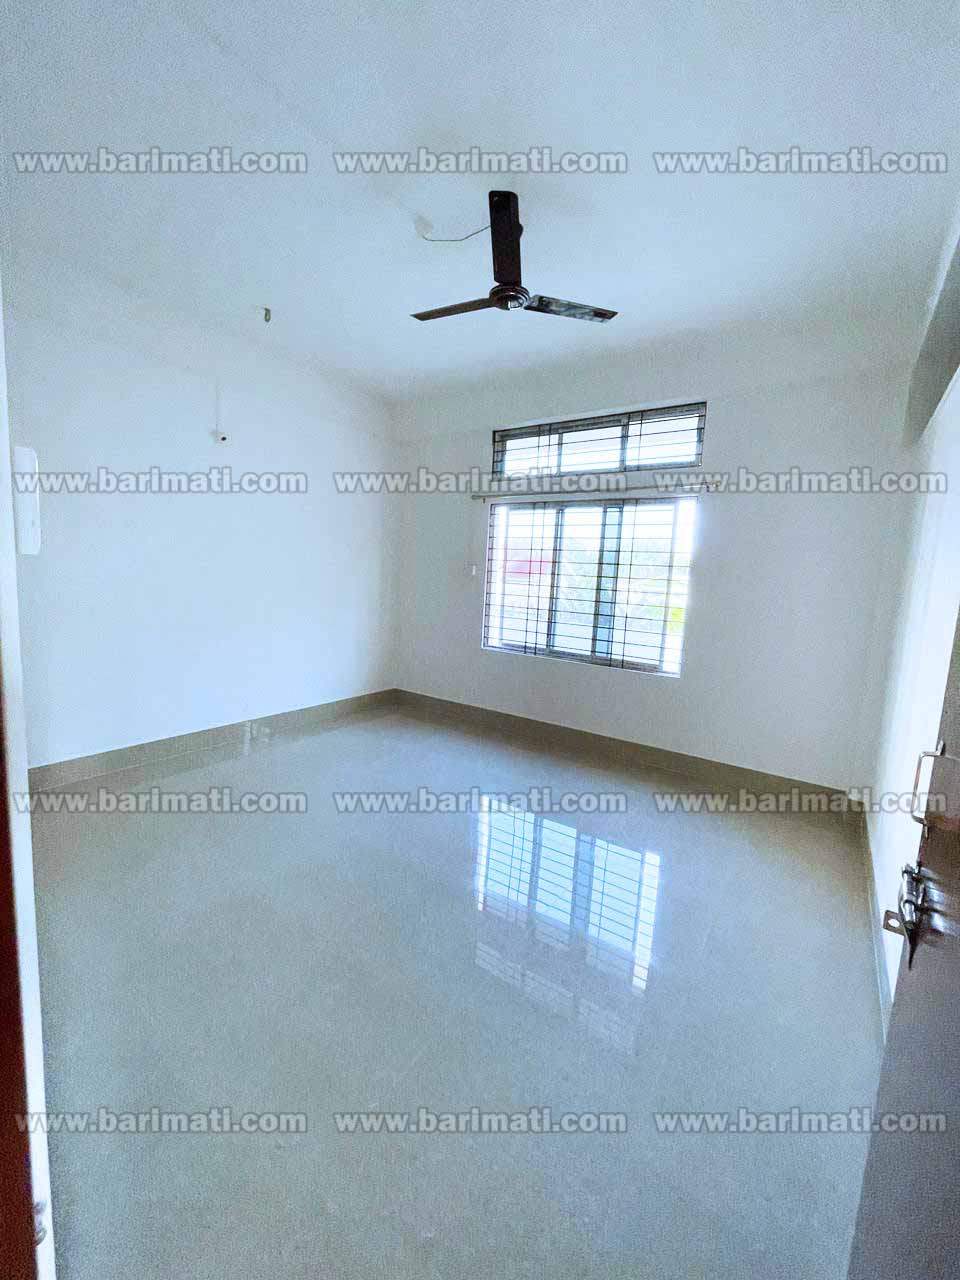 Photograph of a 2 BHK flat for rent in Duarachuk, near Dibrugarh University, that fits the budget of under 15000 per mont